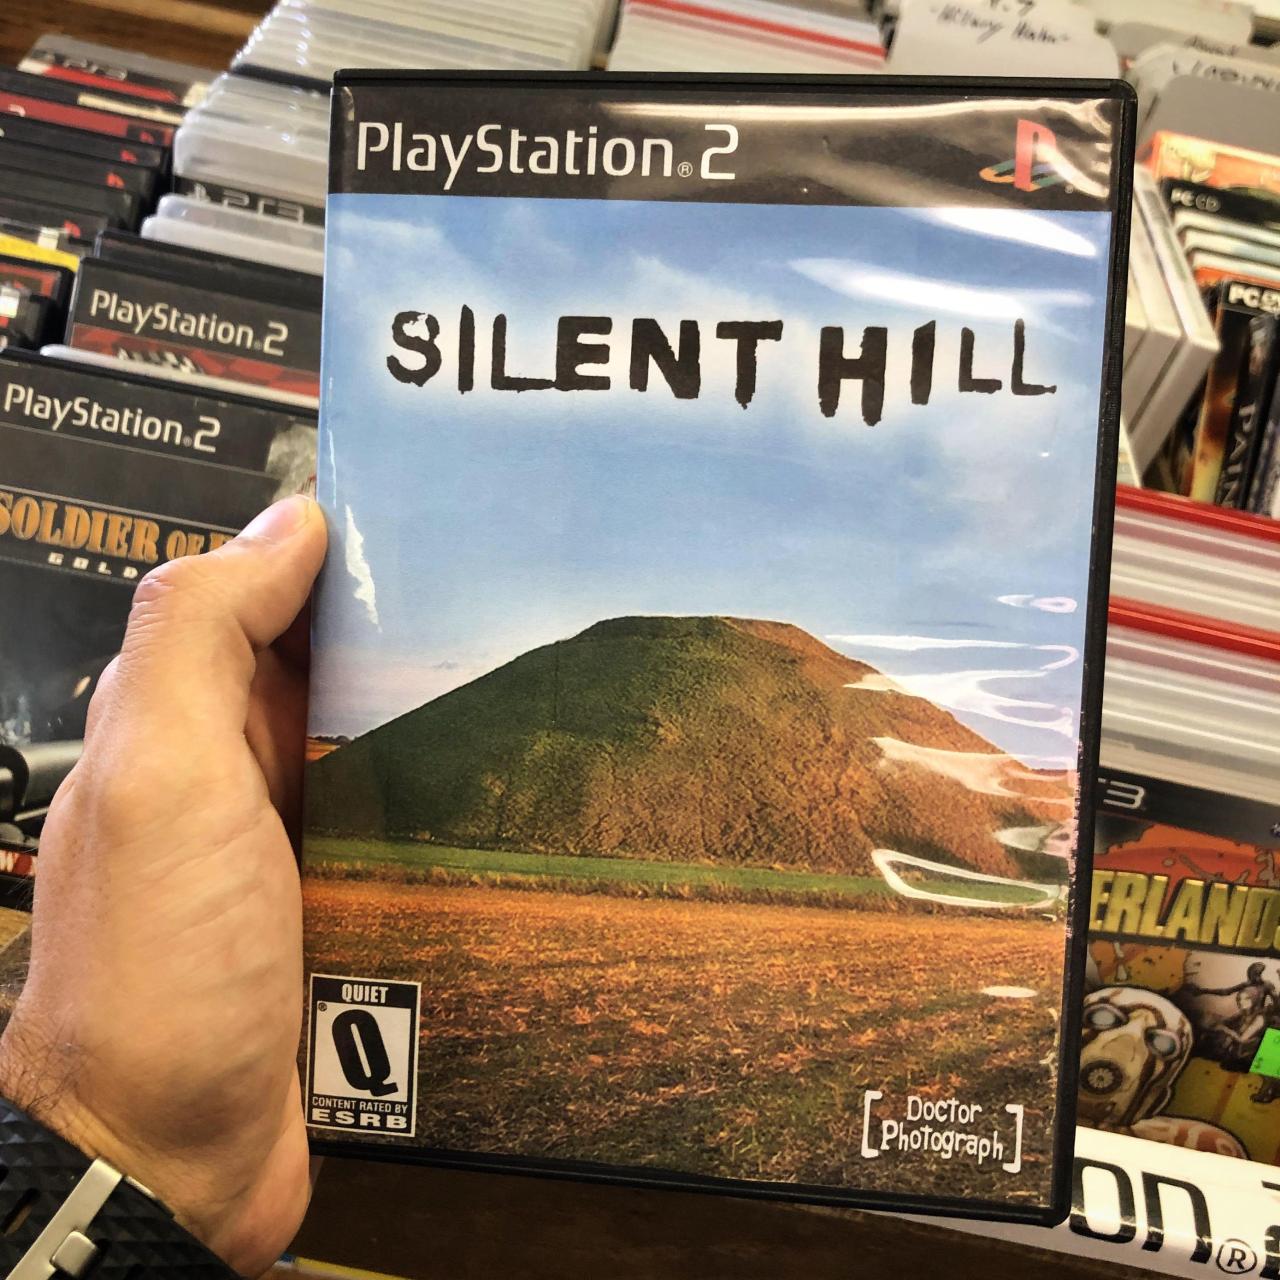 funny gaming memes - they don t make games like they used to - chany PlayStation 2 Pecd Pcs PlayStation 2 Silent Hill PlayStation 2 Soldier Op Em Erlanl. Quiet Content Rated By Esrb photograph On